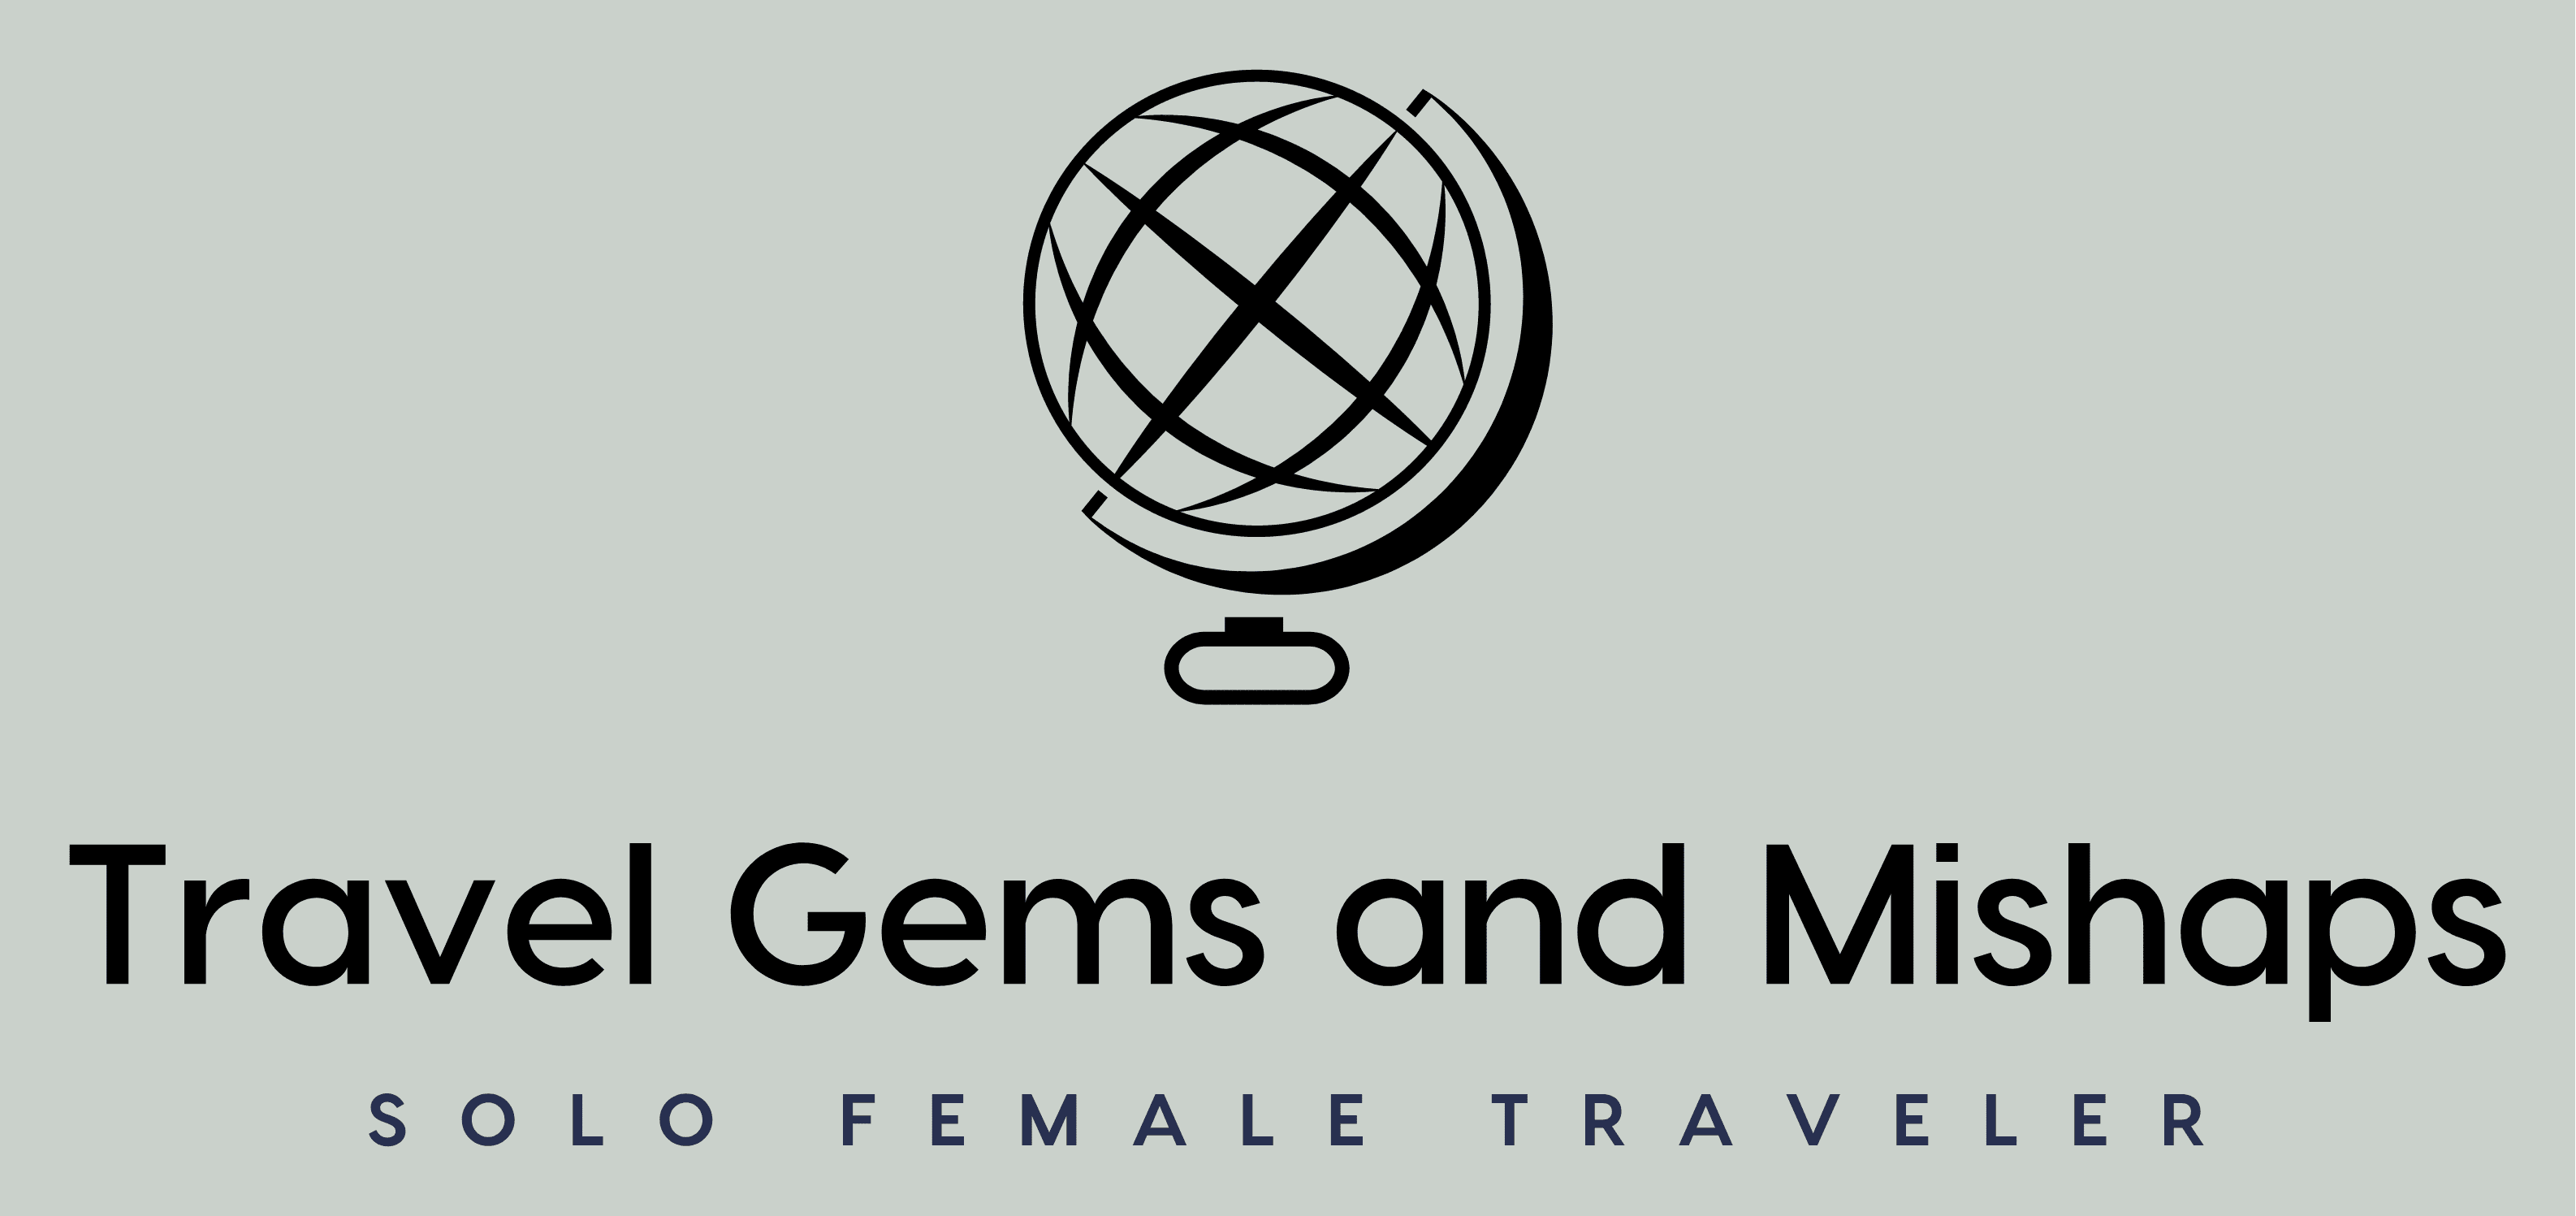 Travel Gems and Mishaps